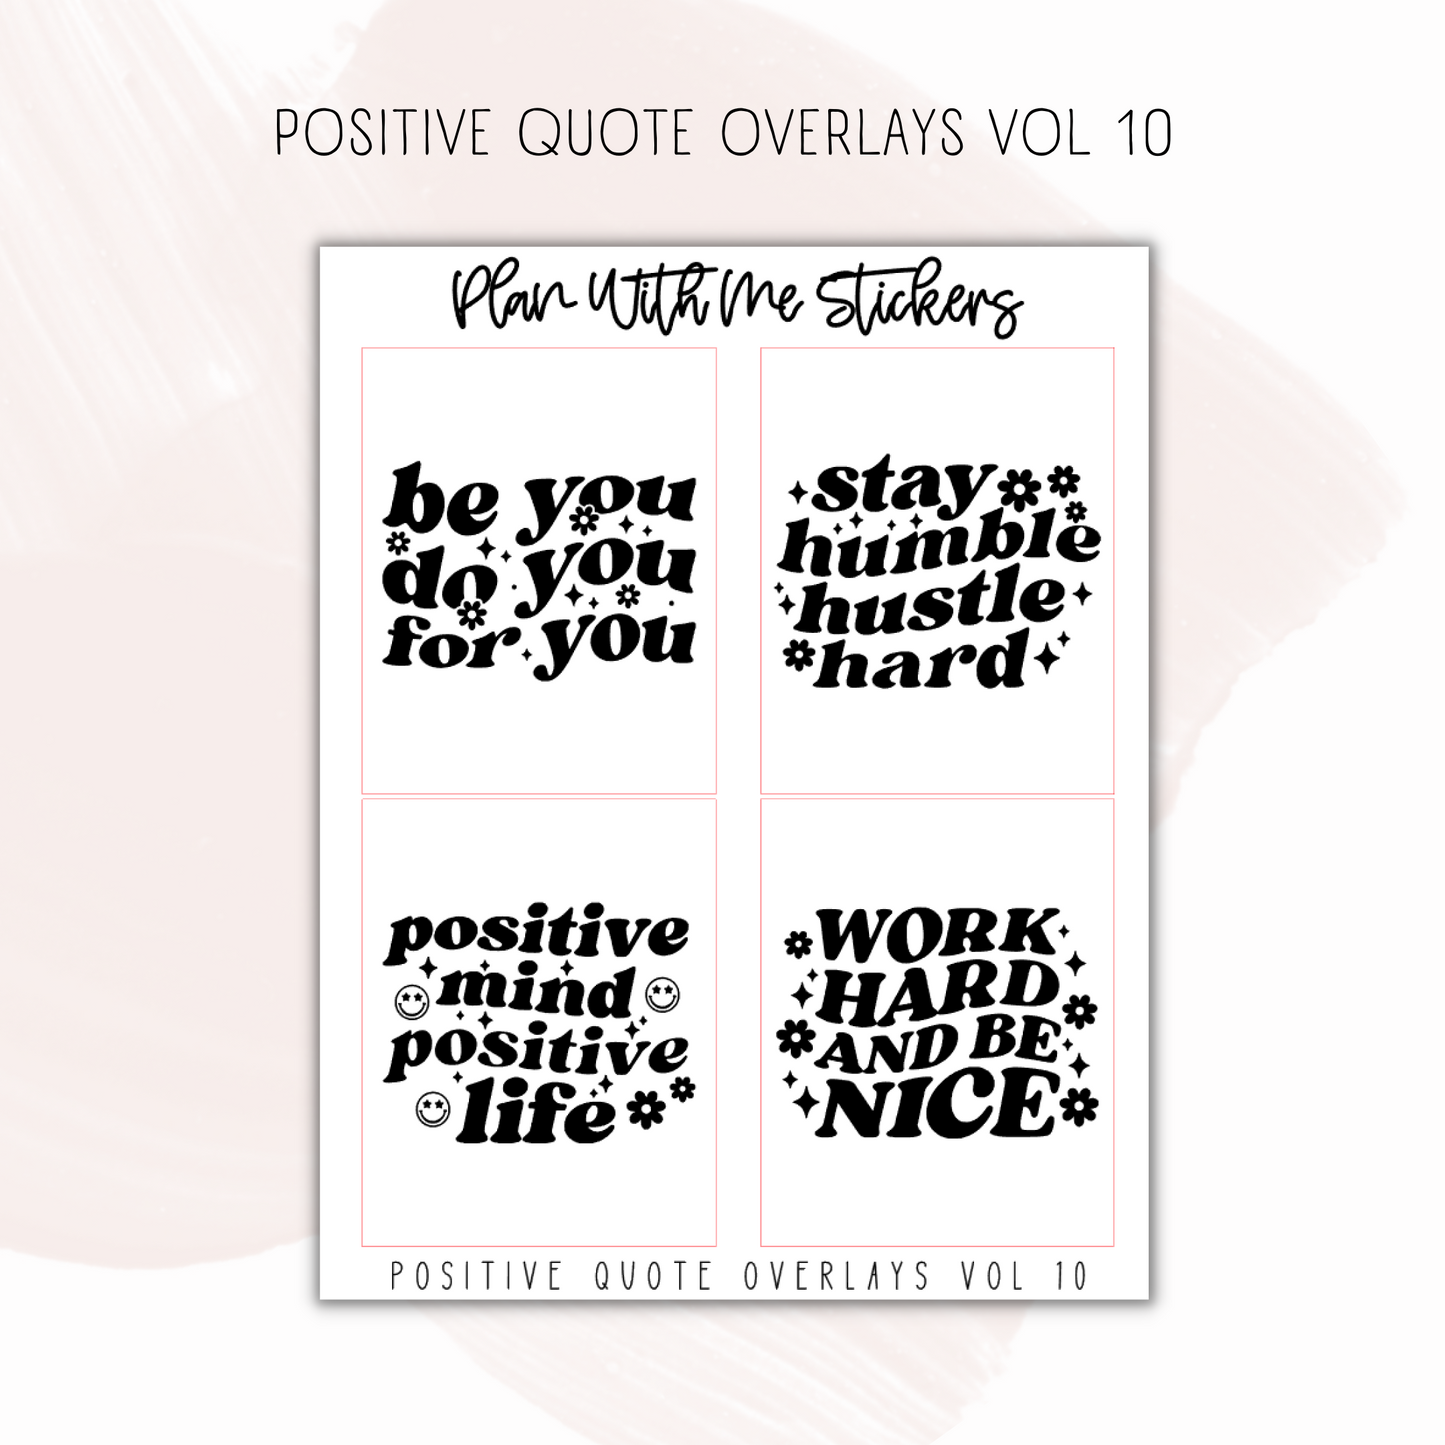 Positive Quote Overlays Vol 10